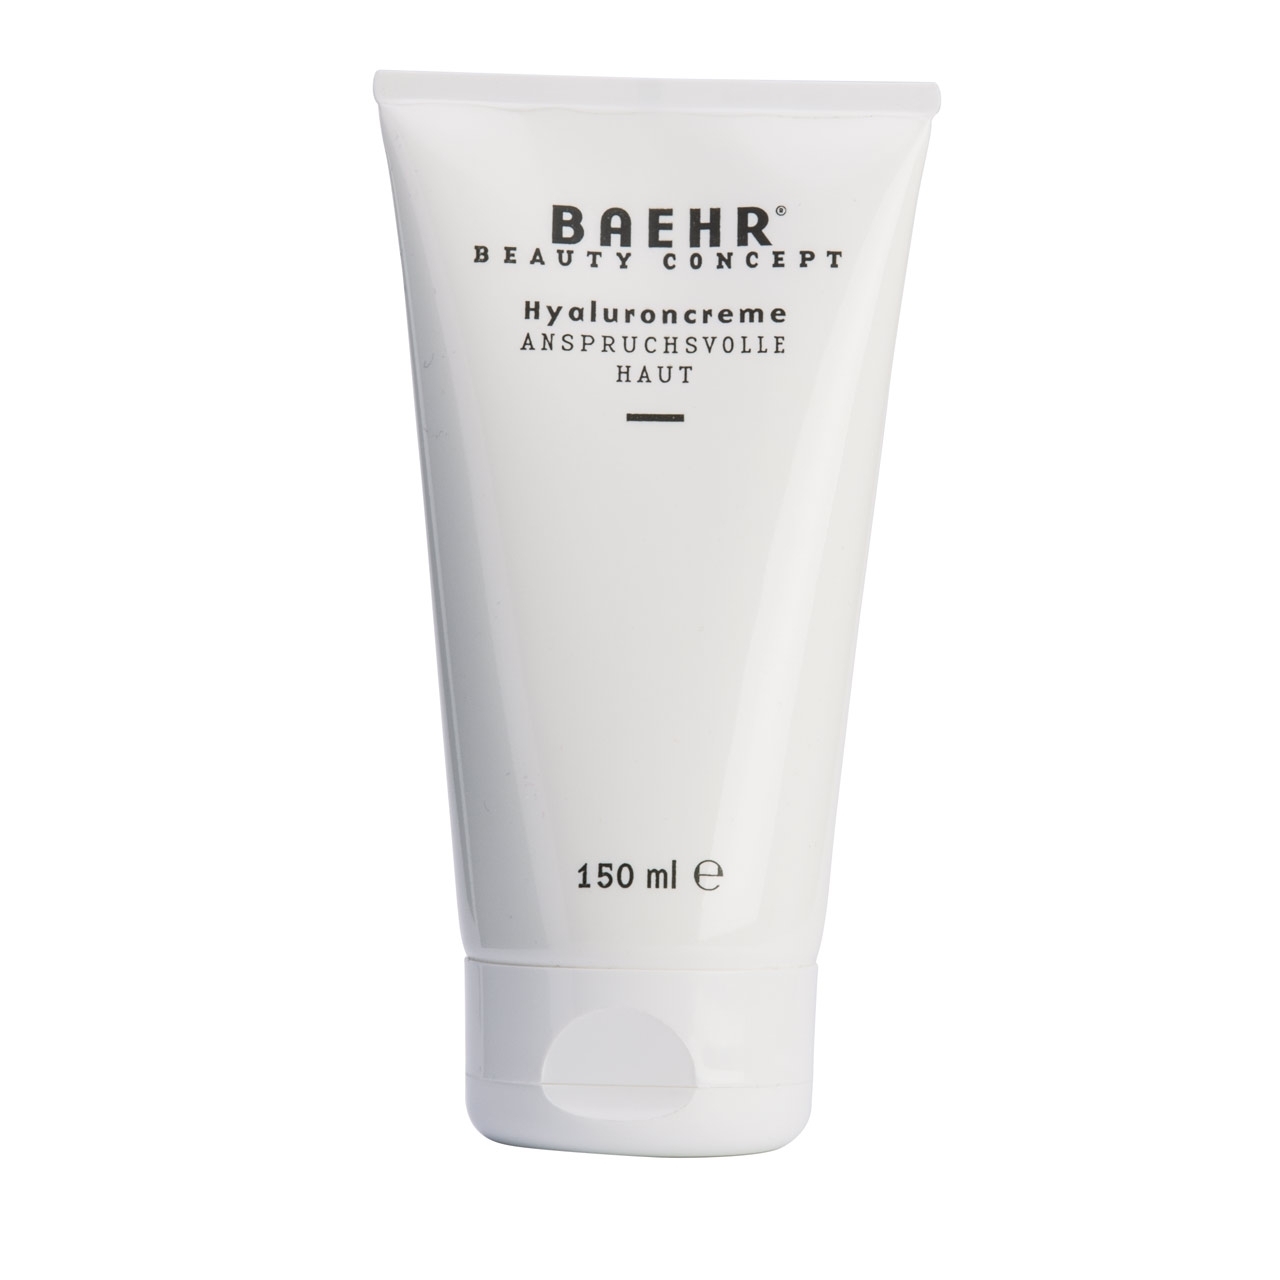 BAEHR BEAUTY CONCEPT Hyaluroncreme 150 ml